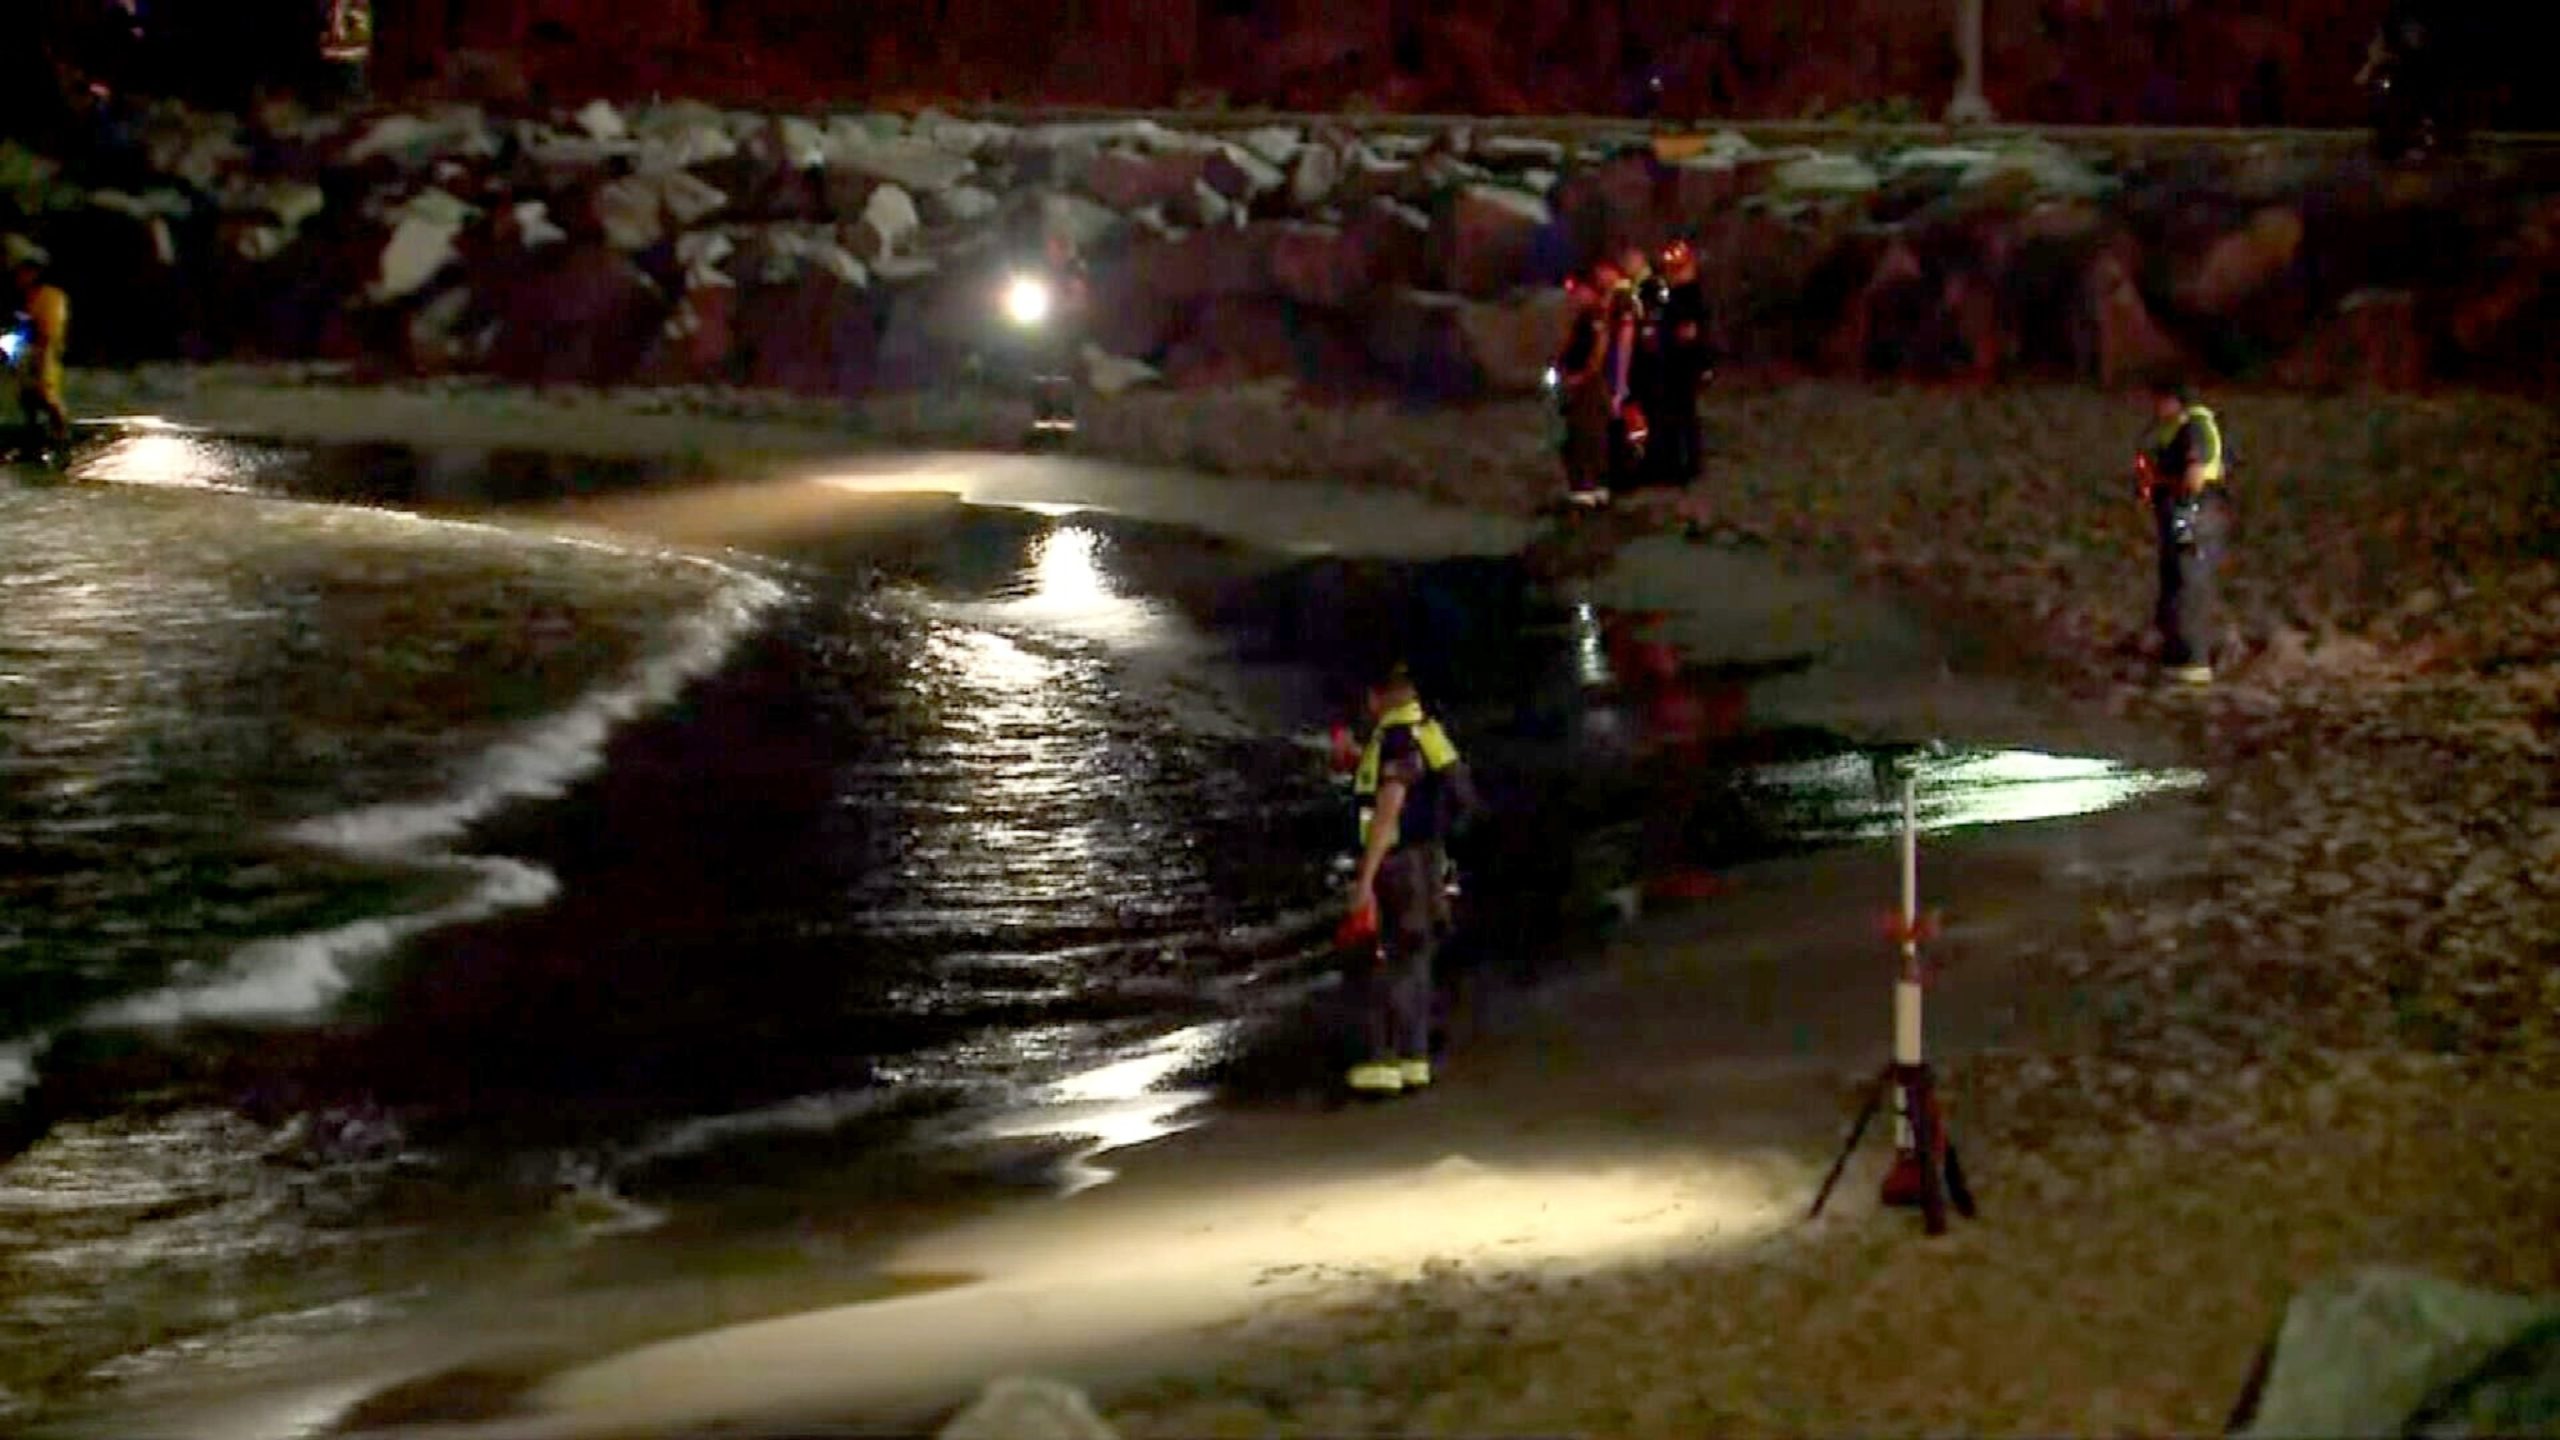 Tragic Incident at Lake Michigan: One Teen Fatally Drowned, Two Others Rescued